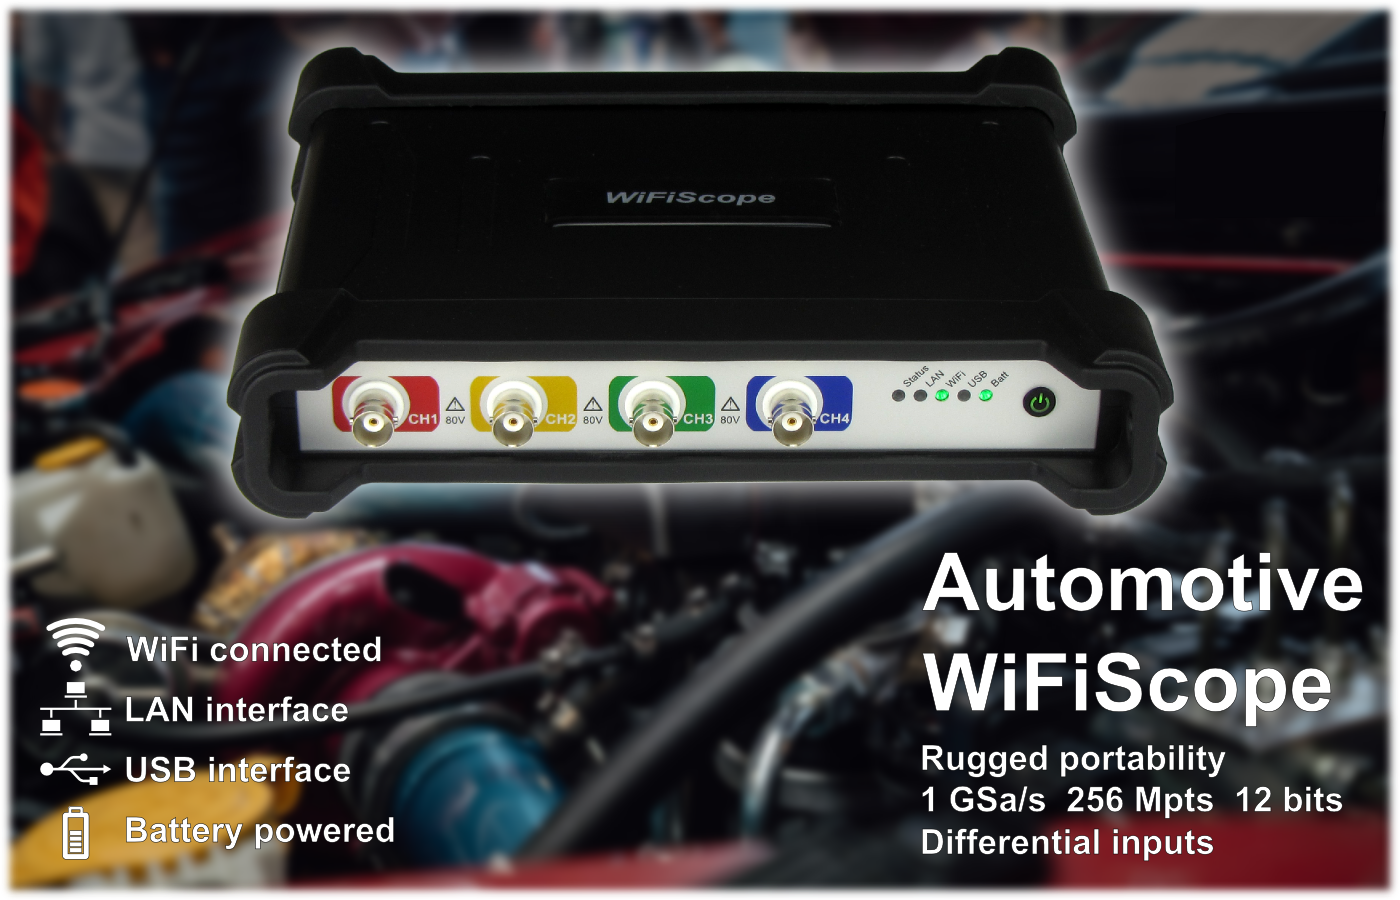 TiePie engineering Automotive WiFiScopes ATS610004DW-XMSG, ATS605004DW-XMS and ATS5004DW